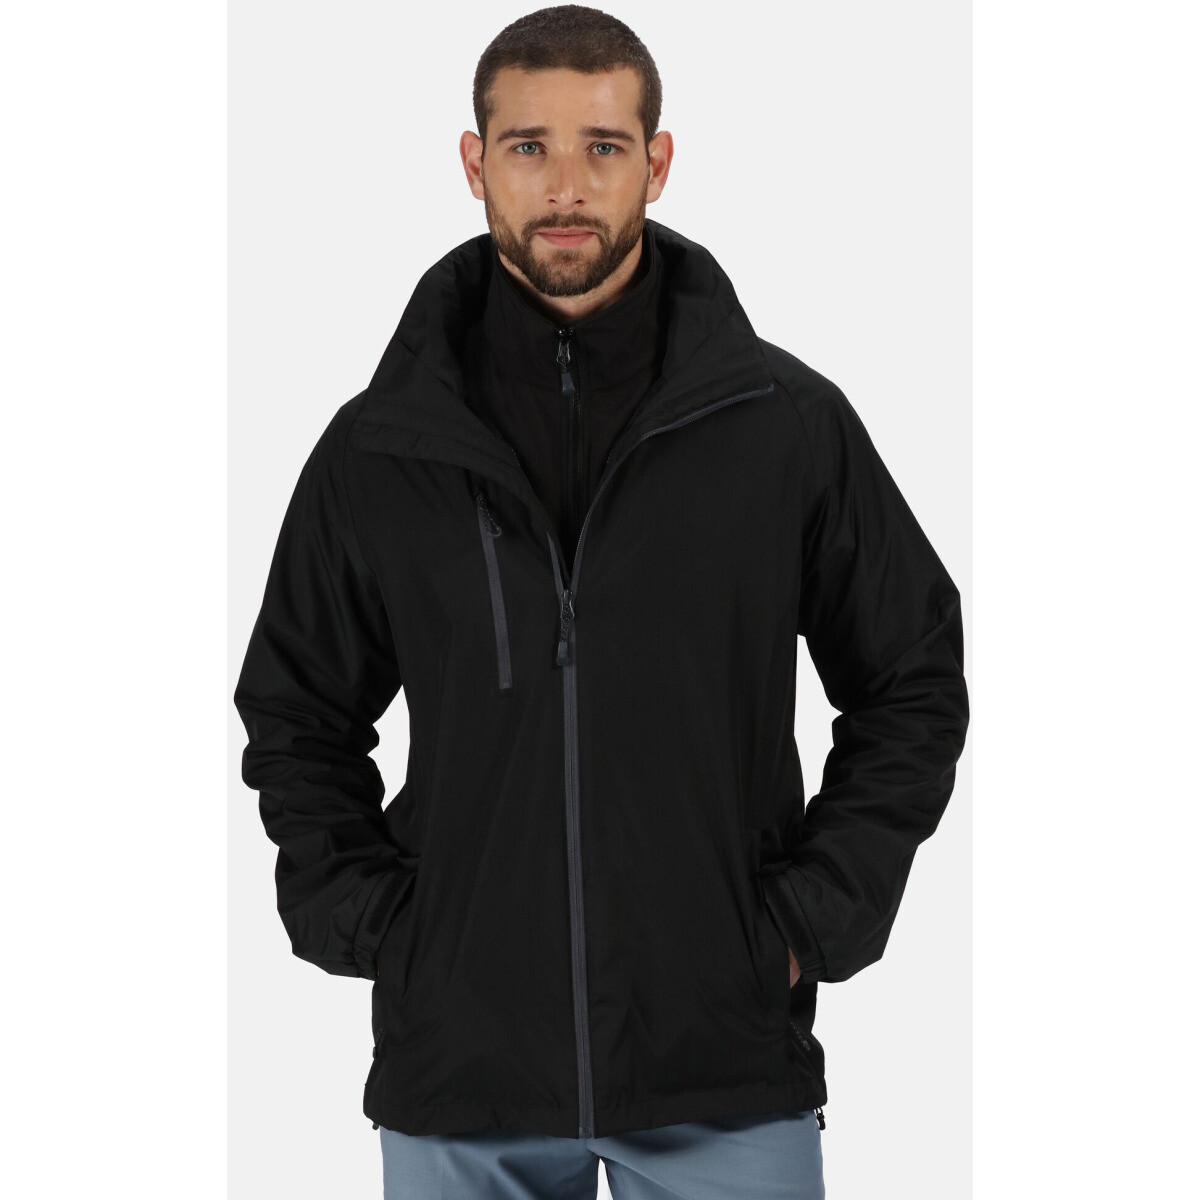 Regatta TRA154 Honestly Made Recycled 3-in-1 Jacket with Softshell ...